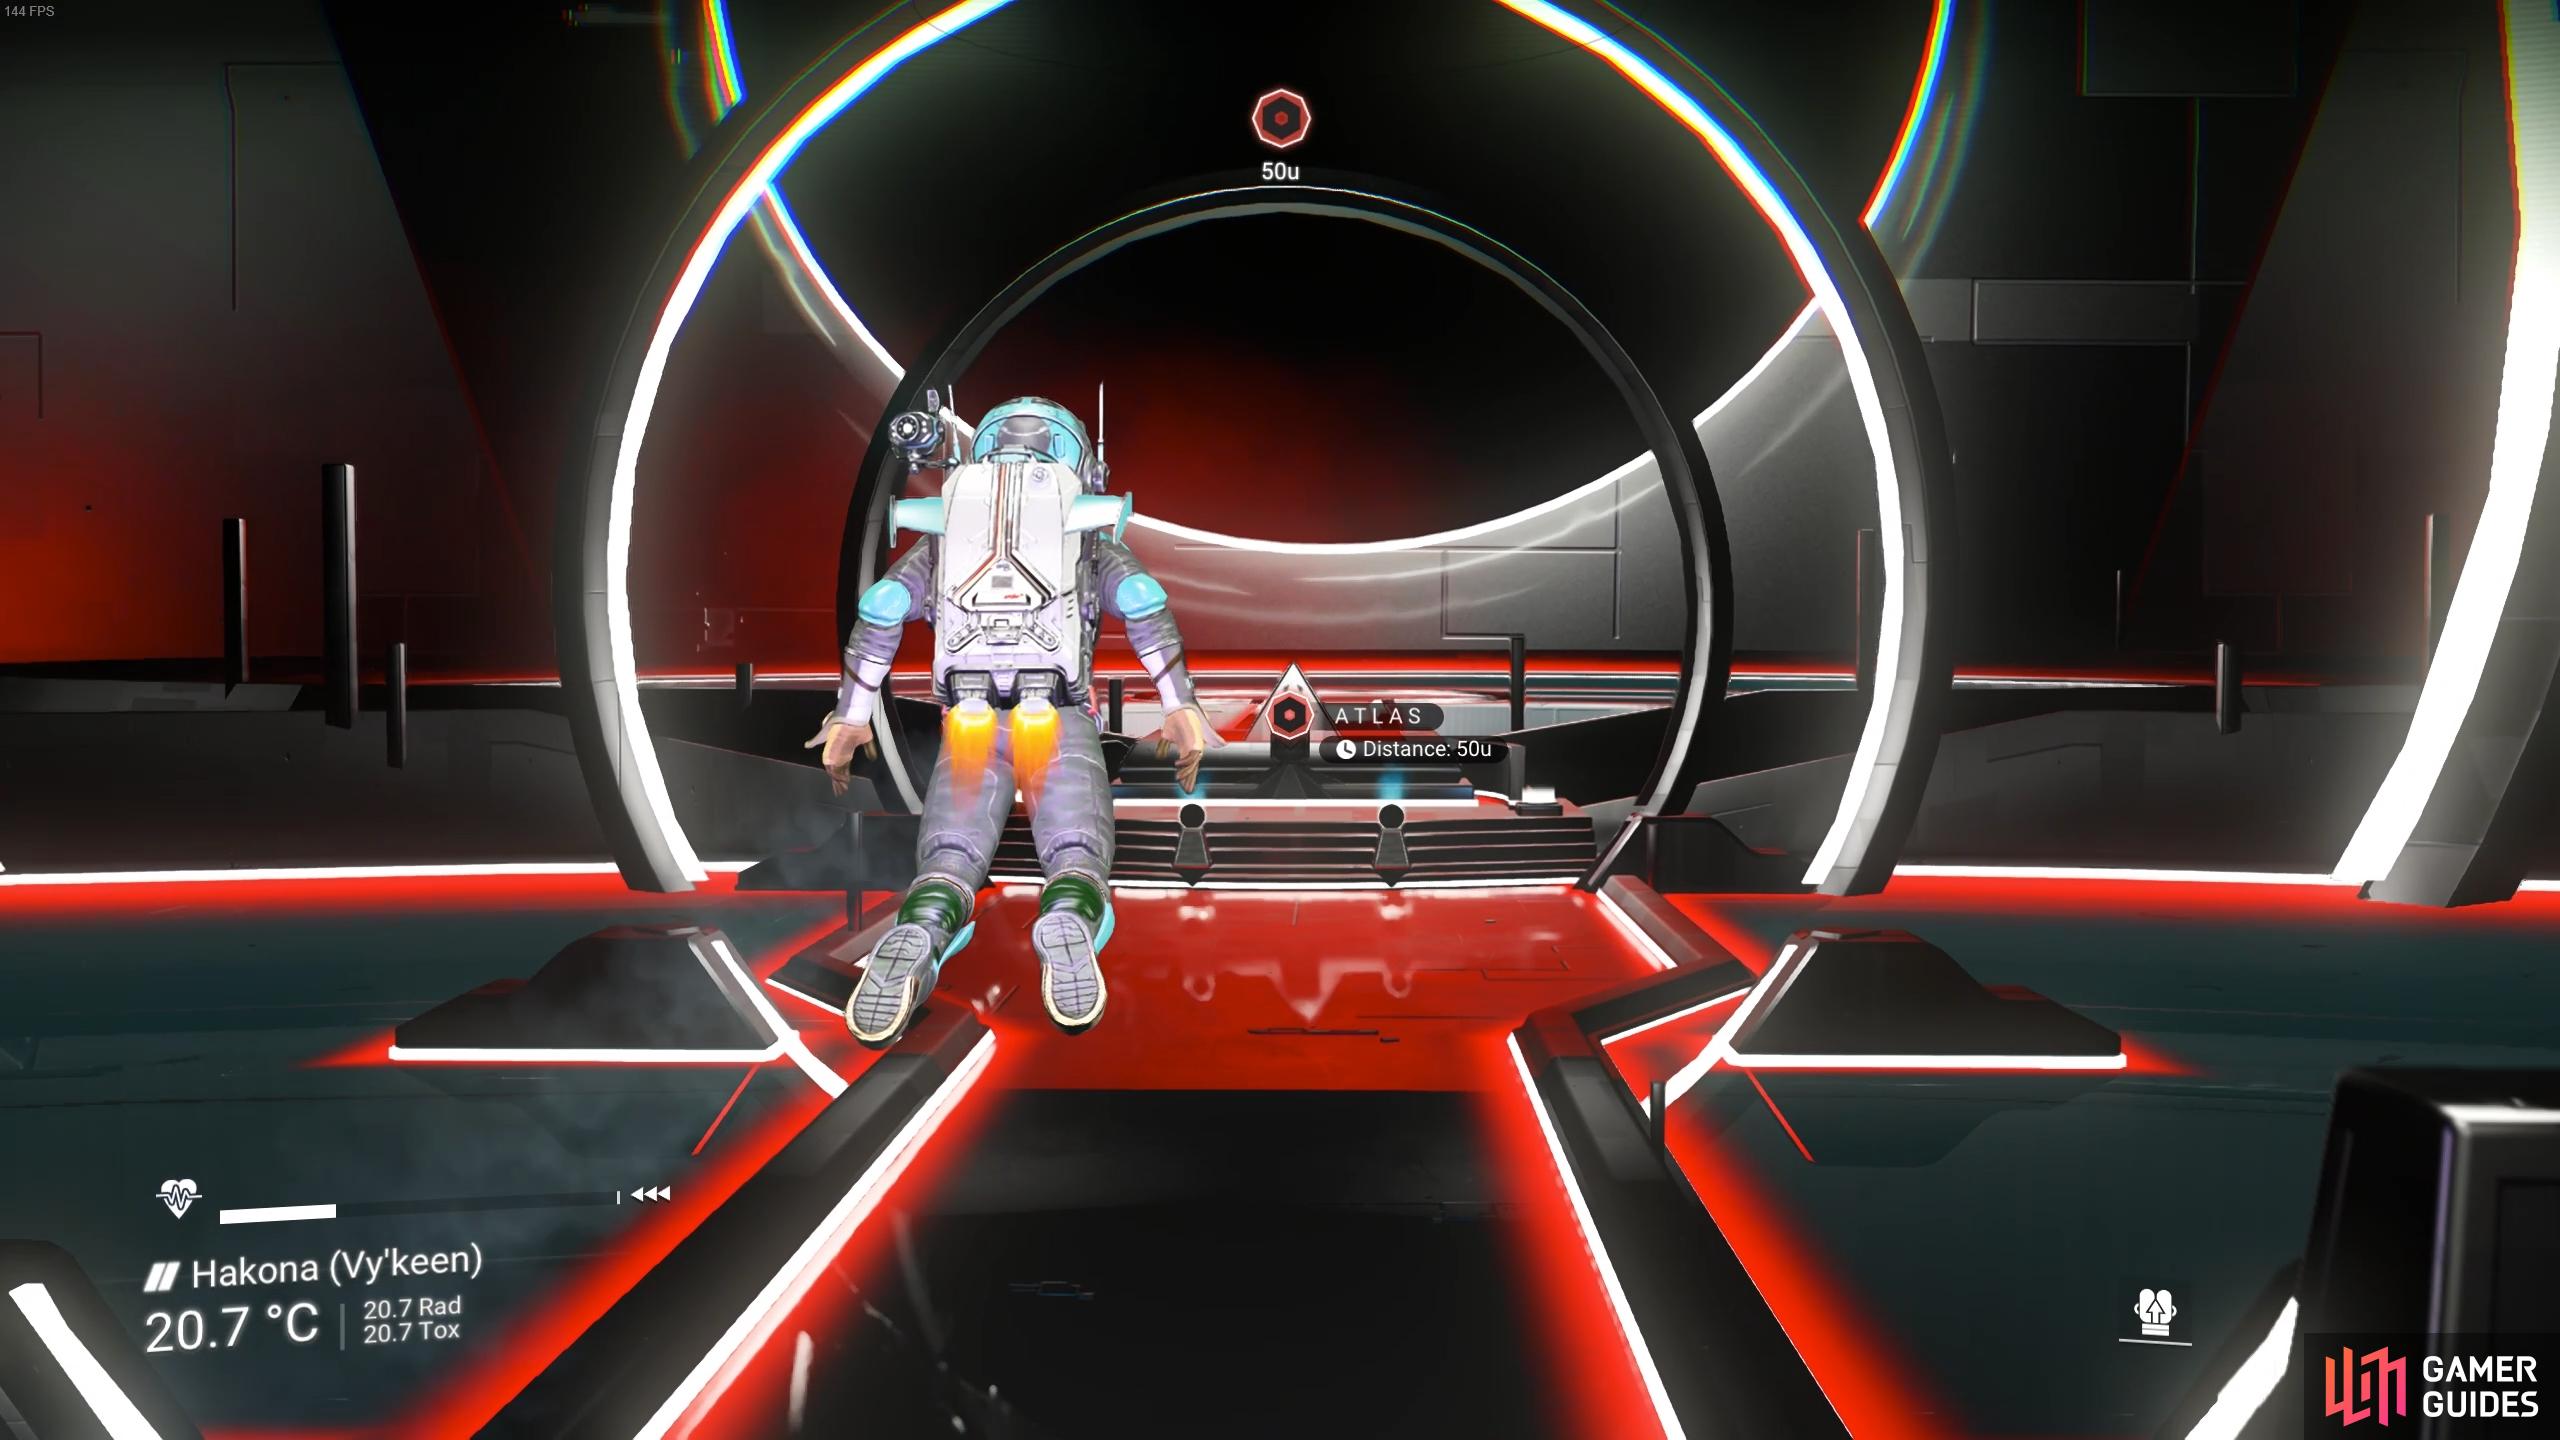 Speak with the Atlas Interface to leave.